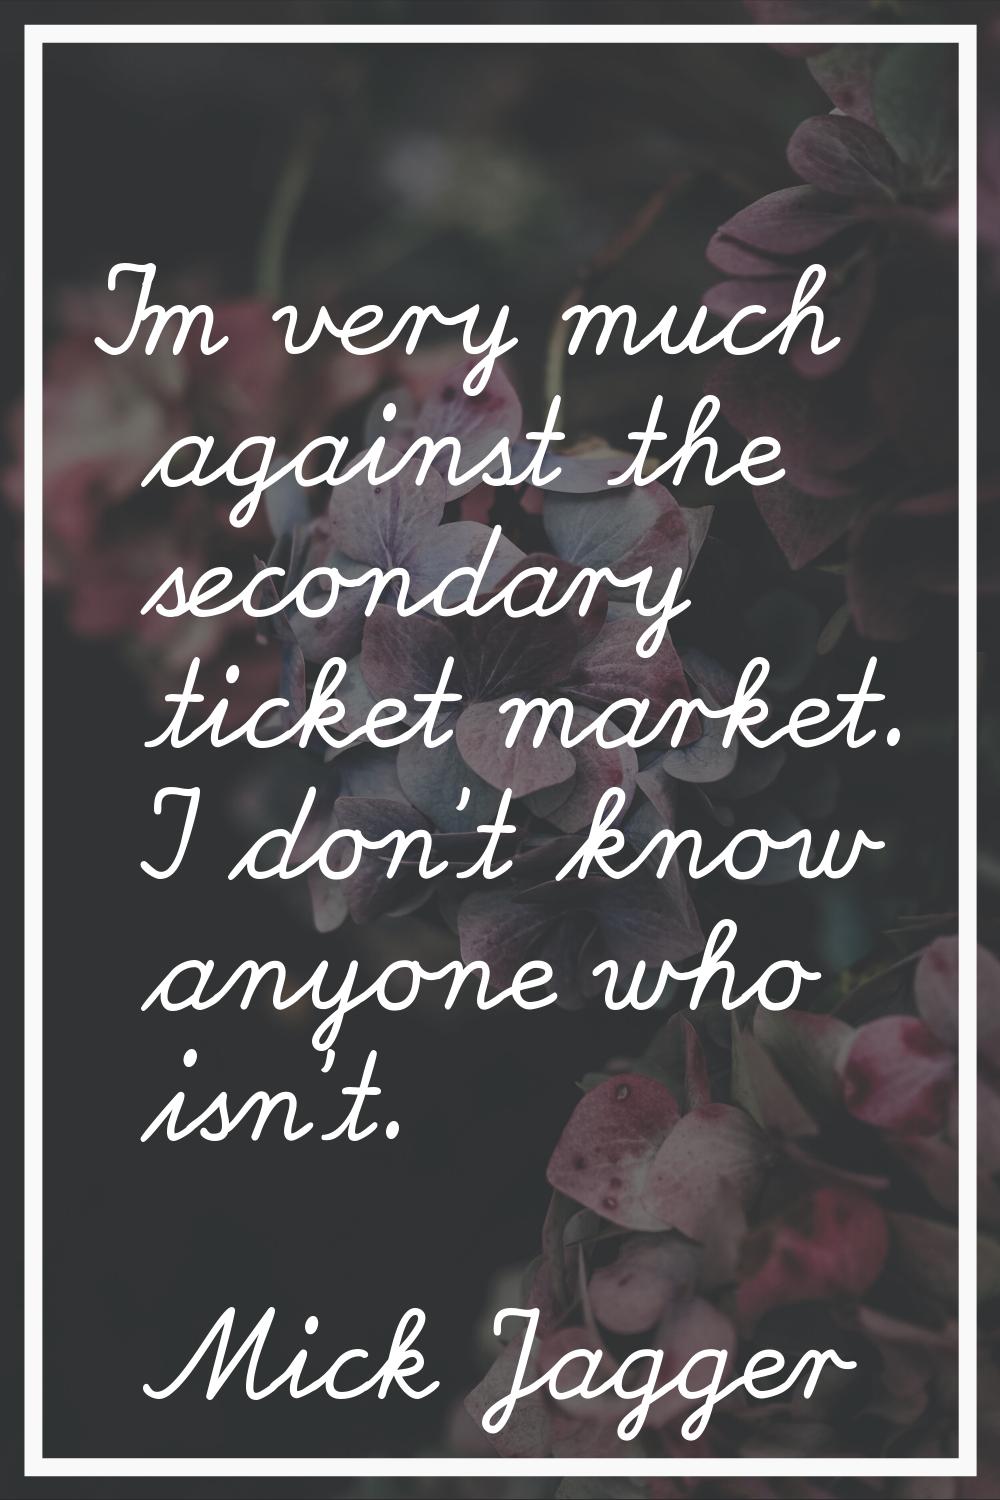 I'm very much against the secondary ticket market. I don't know anyone who isn't.